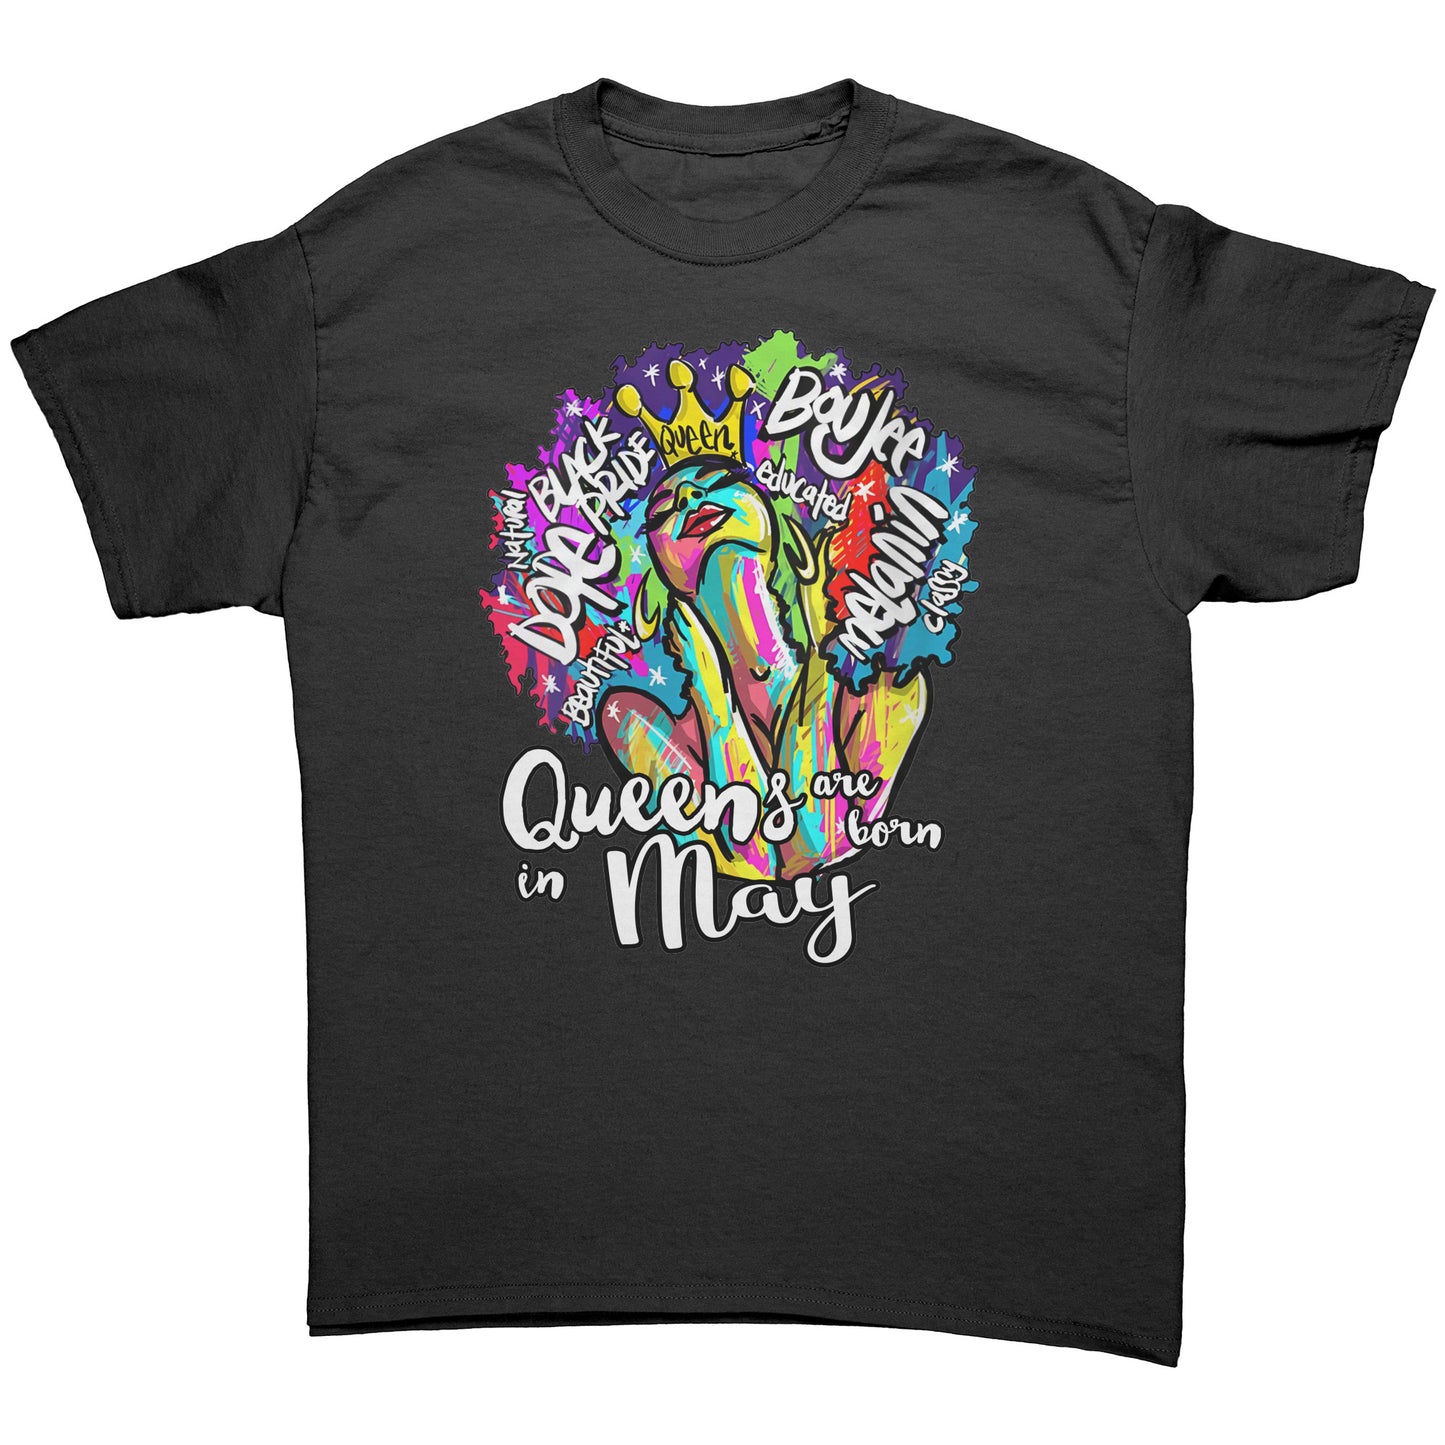 Queens Are Born In May Tee